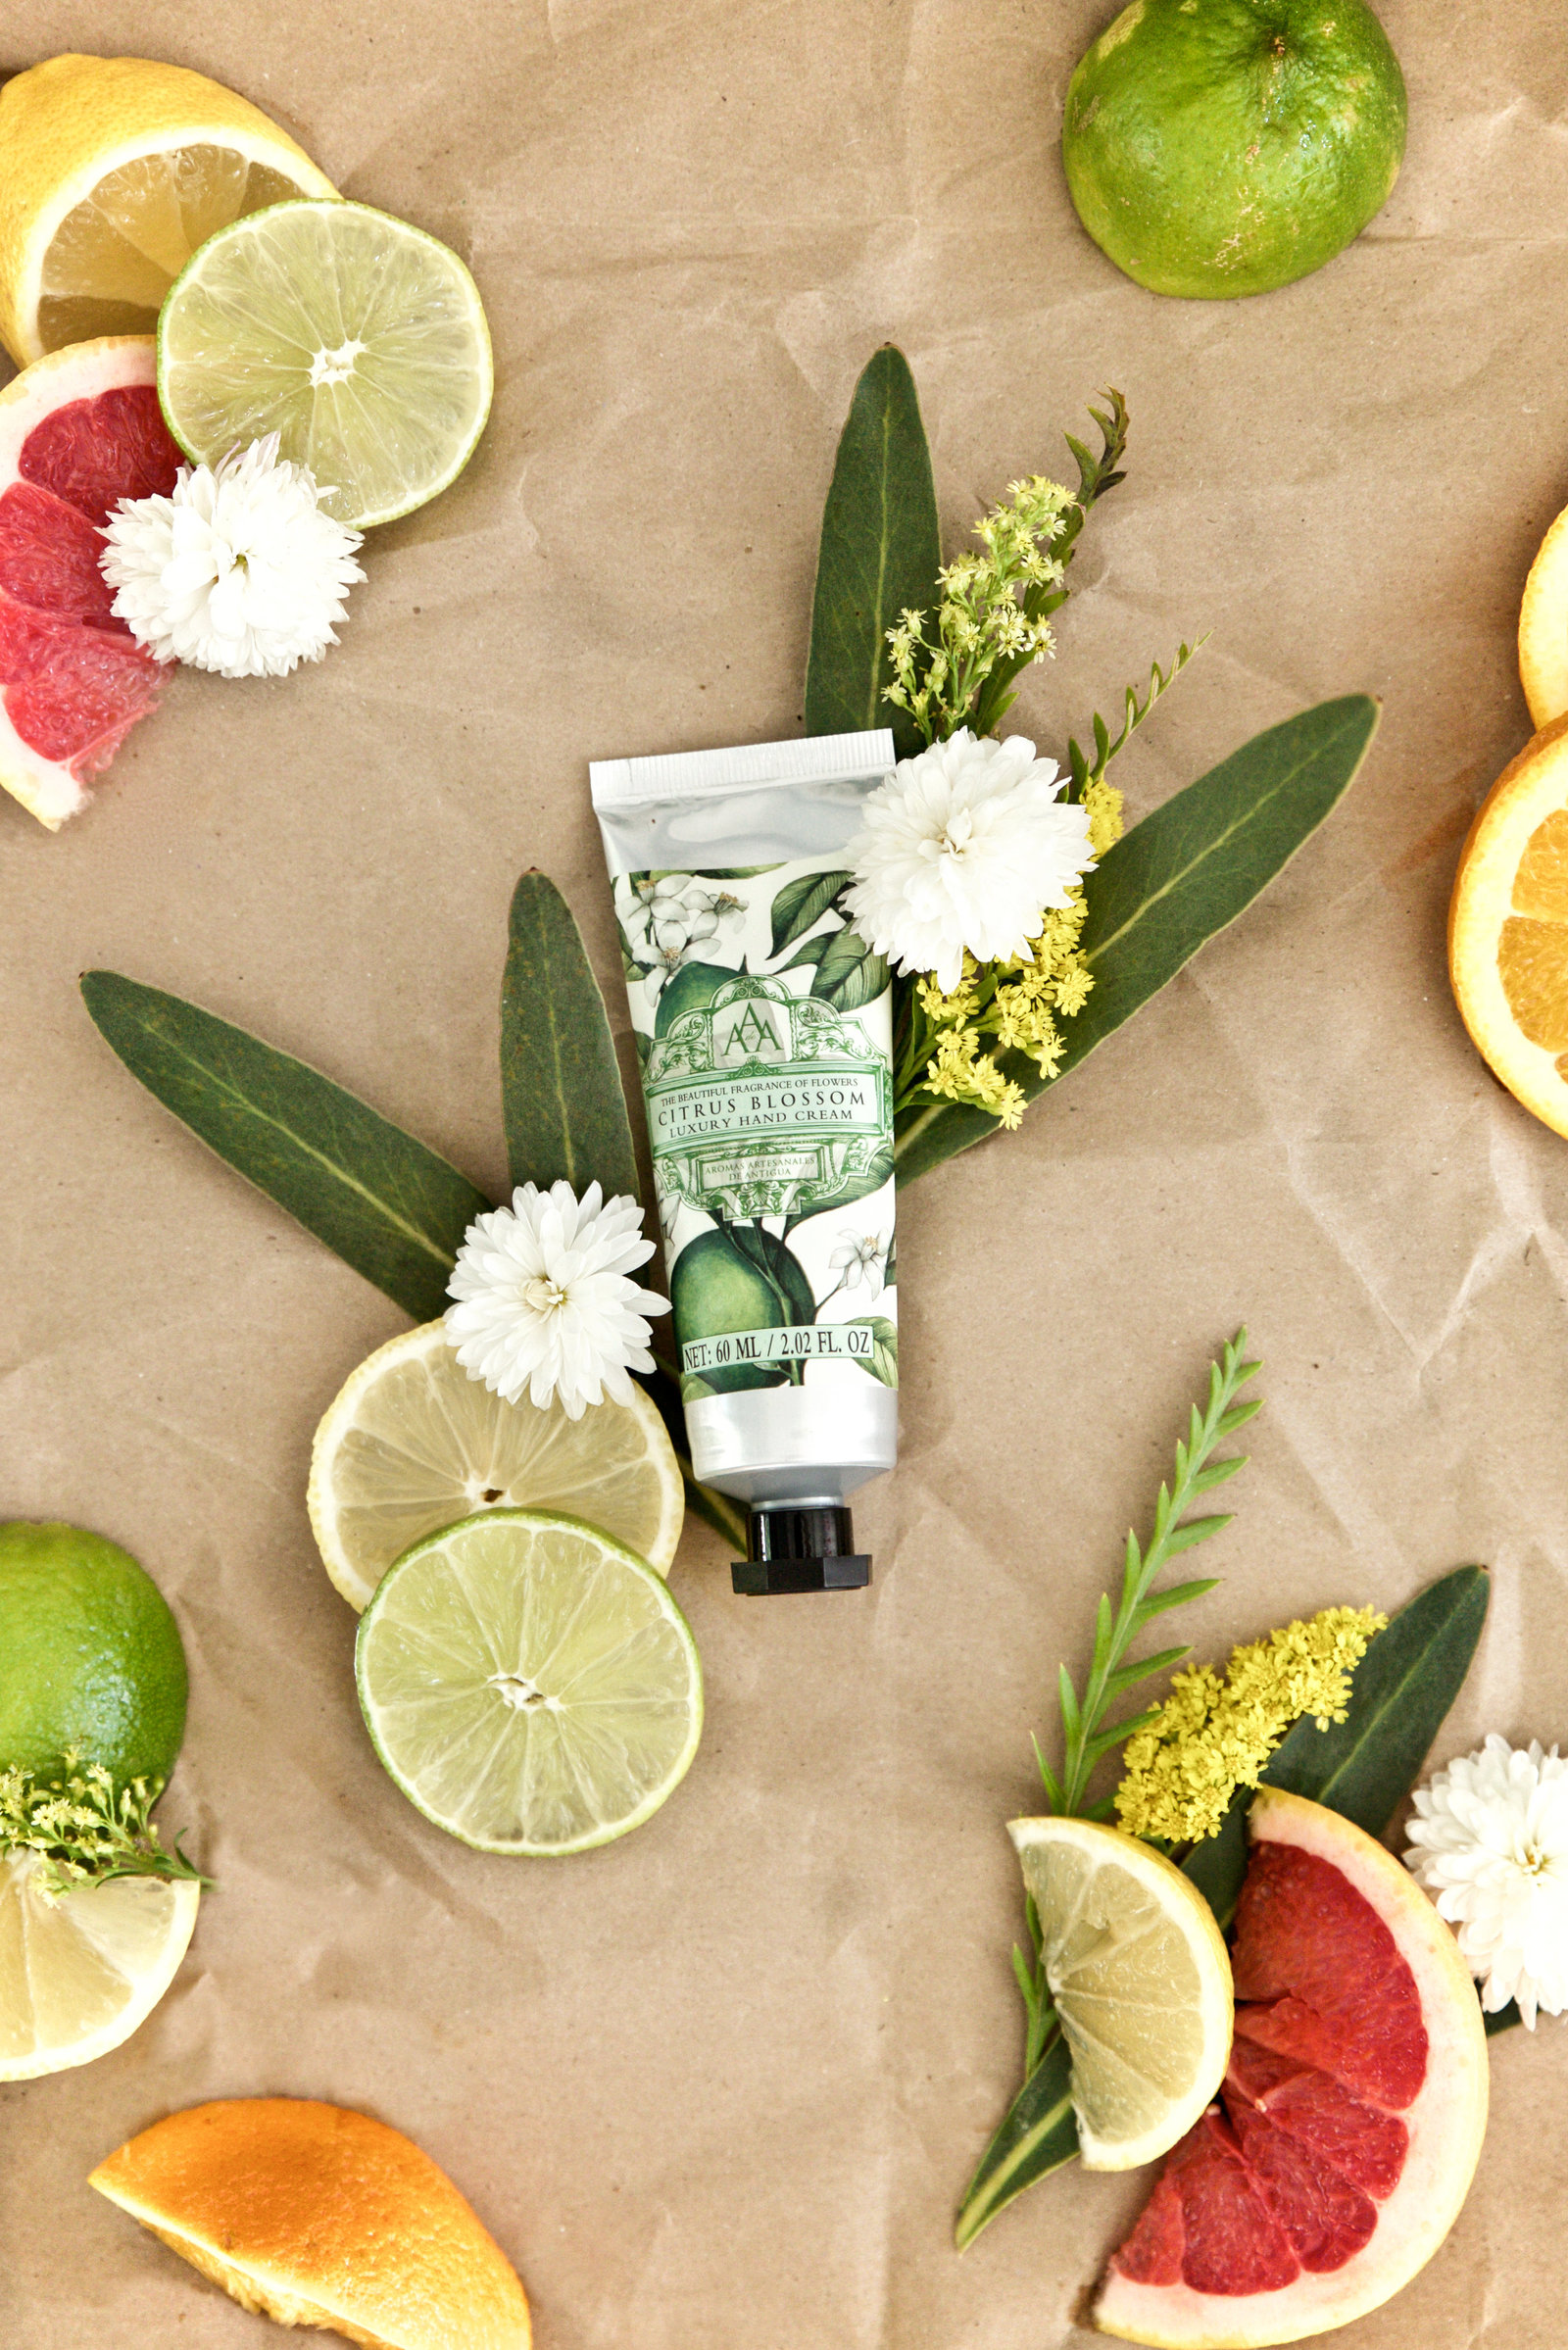 Flat Lay with Fruit Styling for natural skincare lotion company featuring grapefruit lime  flowers natural elements